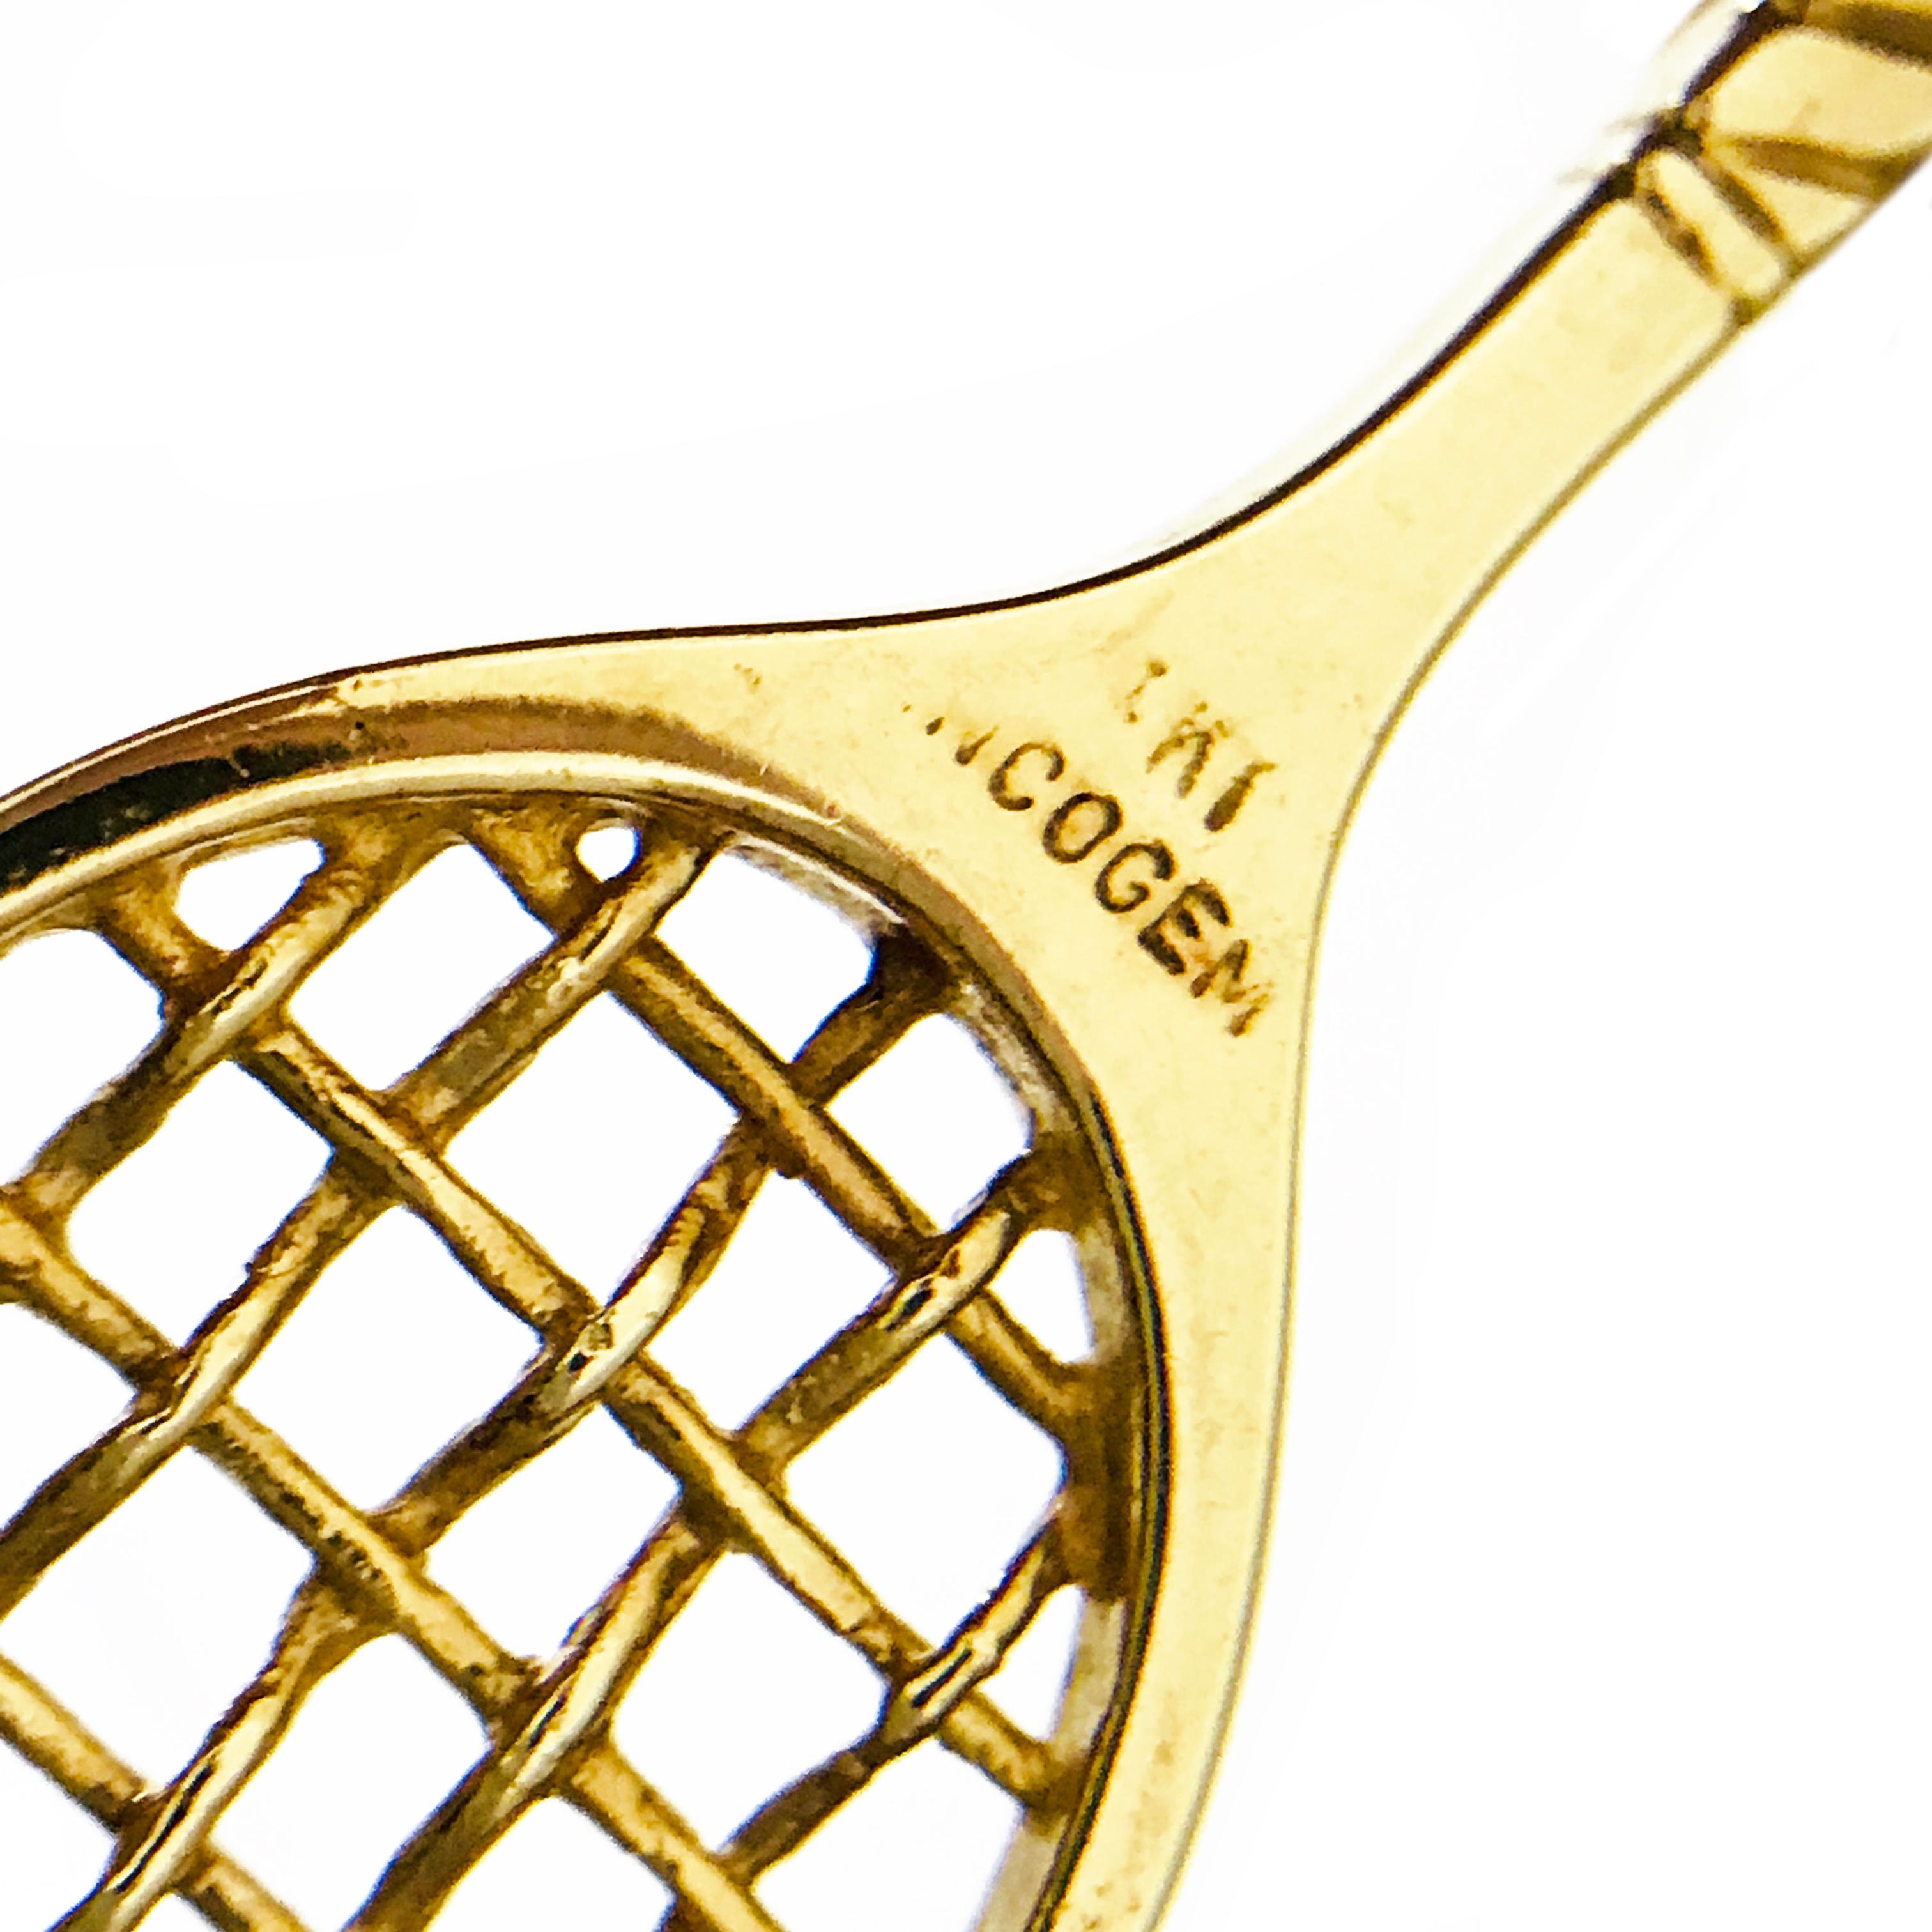 Incogem 14k Yellow Gold Racket Pendant. Serving up some fun on this piece, if you love the game you'll love this darling pendant. The pendant is meticulously handcrafted of 14k yellow gold, so much detail in handle and in the strings to appreciate.